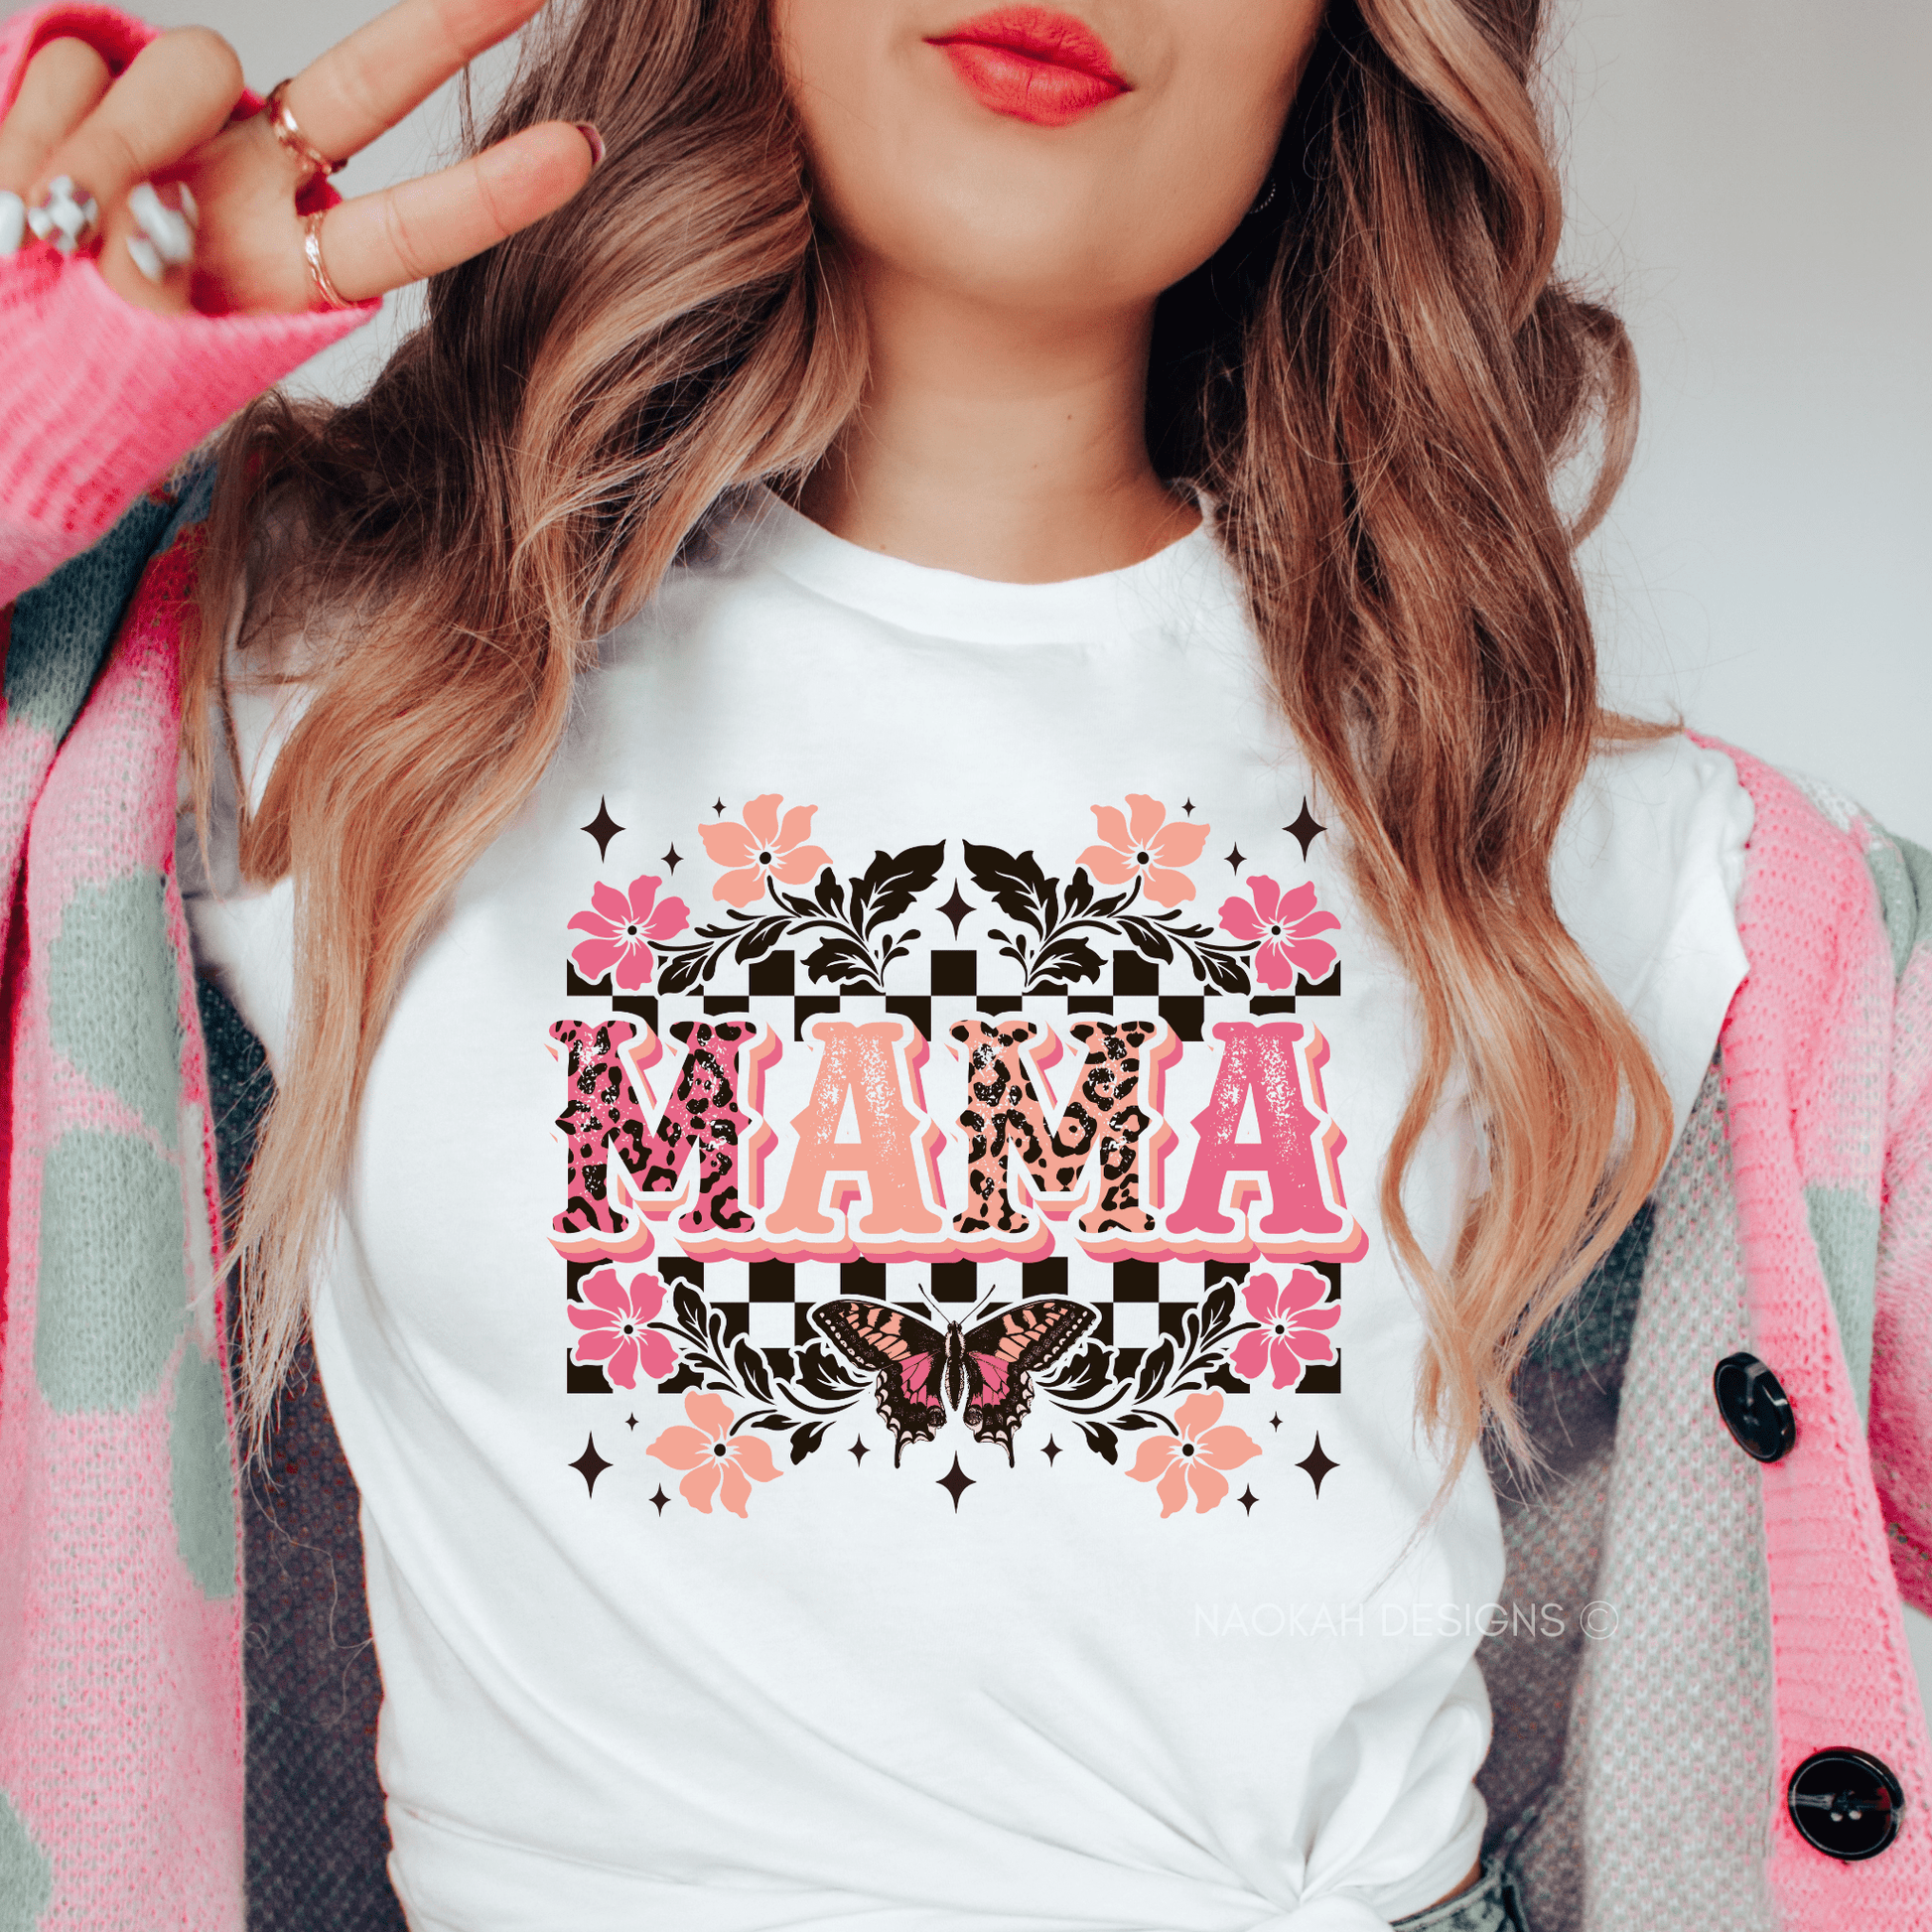 Mama Floral Butterfly Shirt, Mothers Day Gift, Mom T-shirt, Floral Shirt, Butterfly Shirt, Flower Shirt, Women Tees, Mothers Day shirt